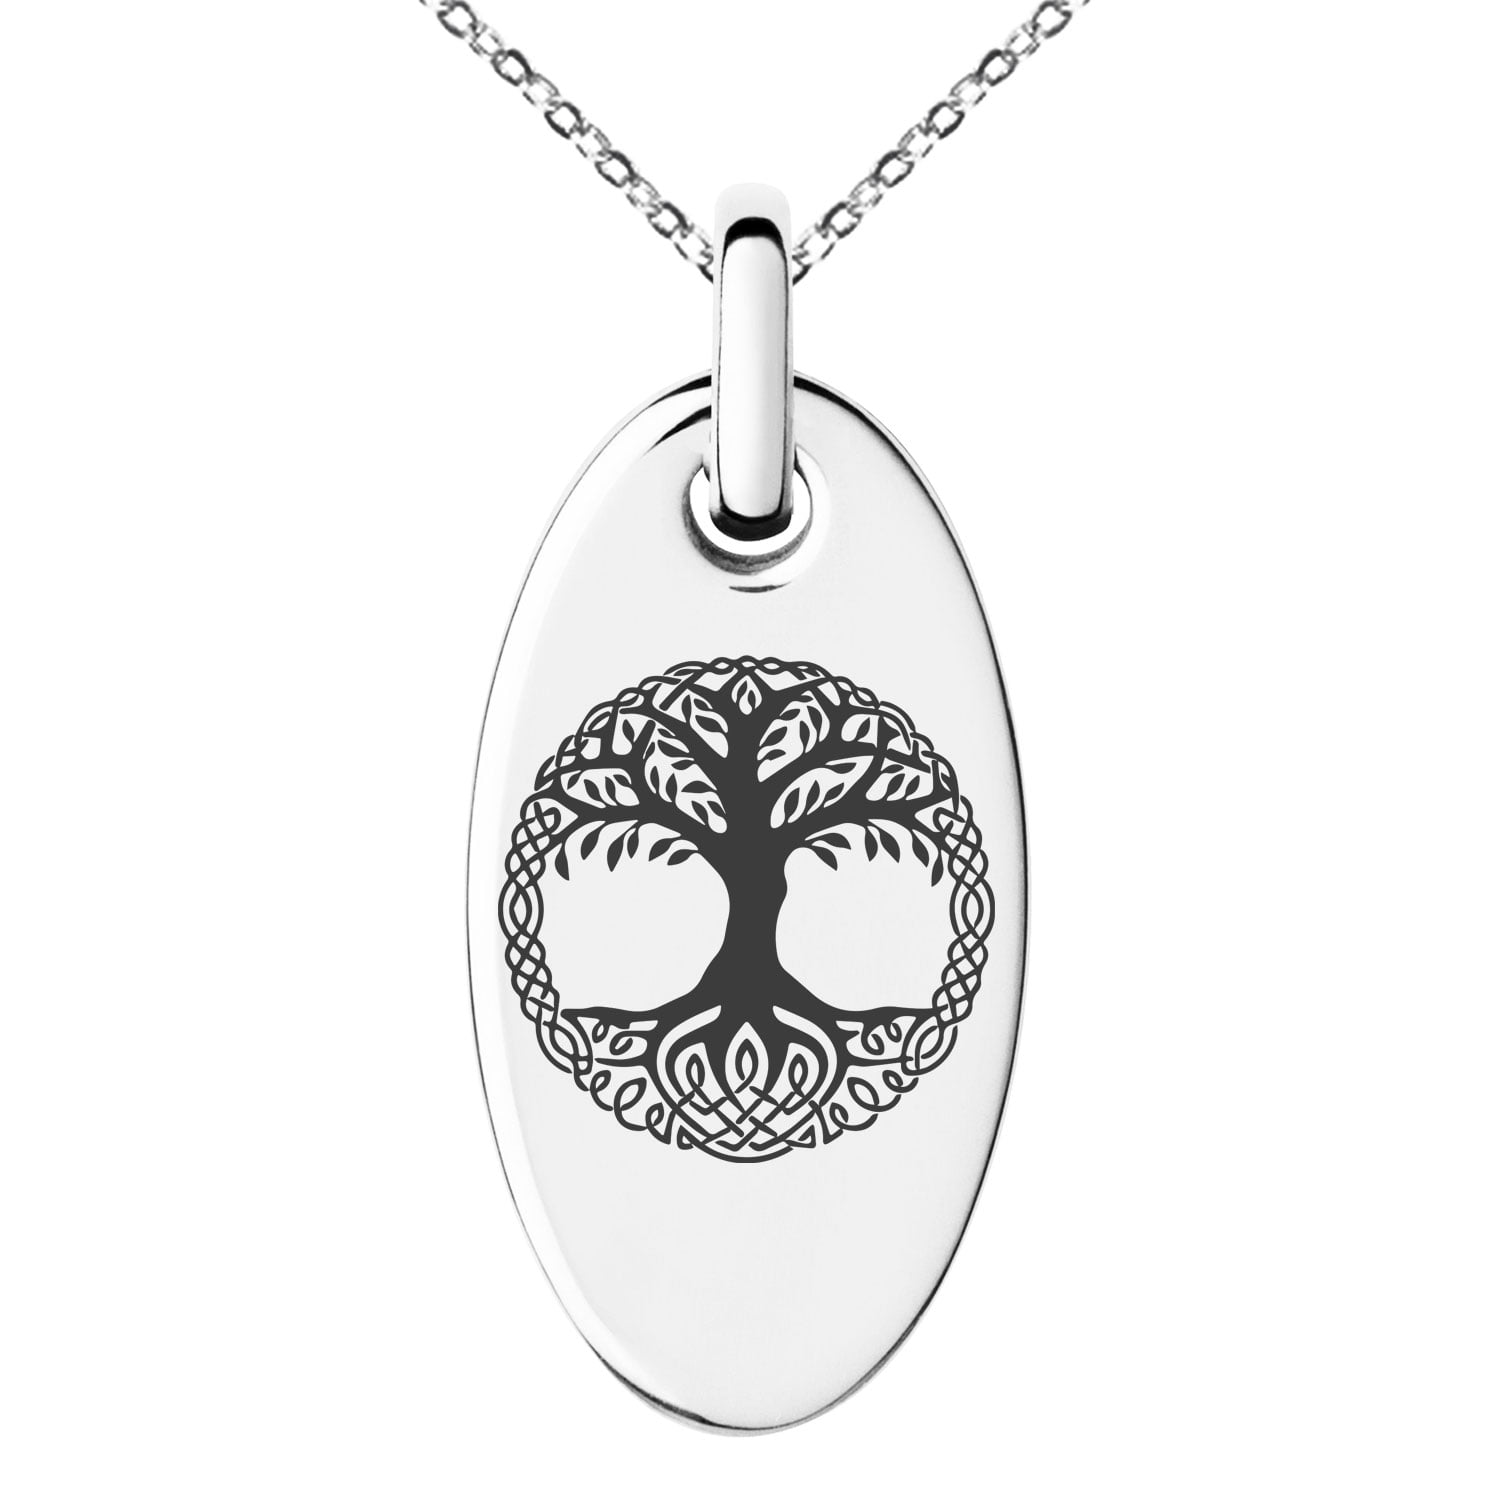 Tree of Life Necklace Sterling Silver Initial Letter Pendant Necklace Blue Circle Crystal Fashion Jewelry Gifts for Women Girls Birthday Christmas